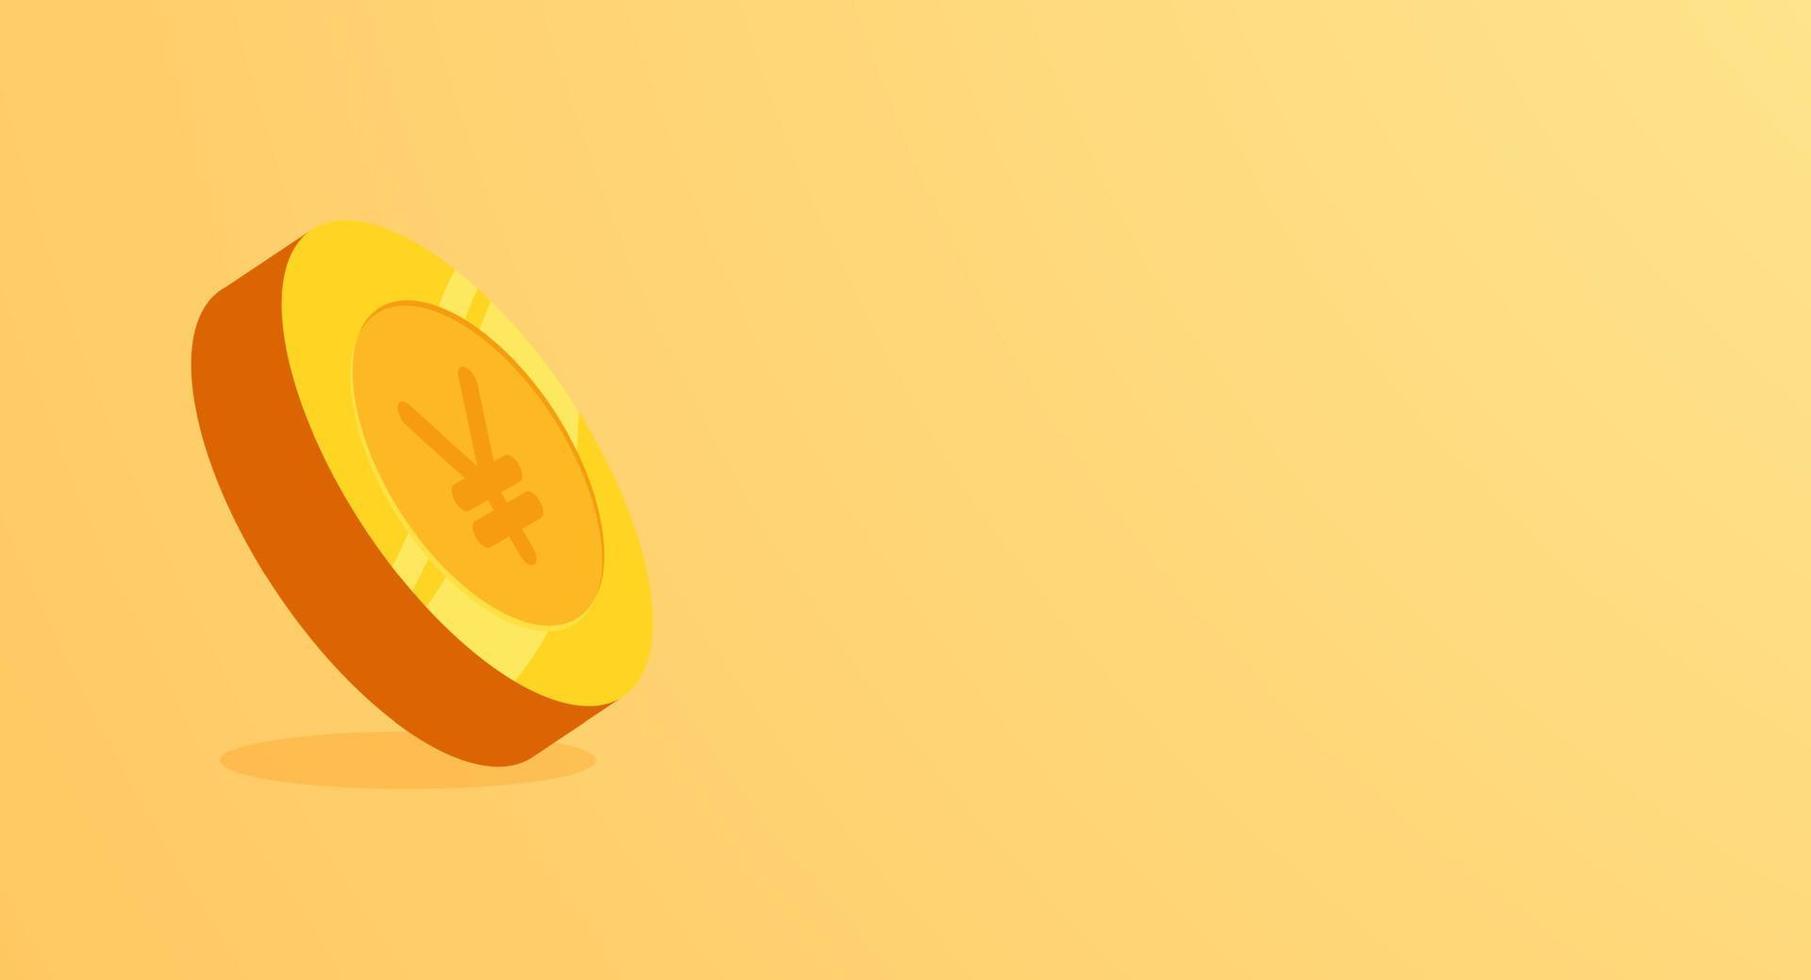 Golden yen banner isolated on yellow background. 3d coin vector illustration.